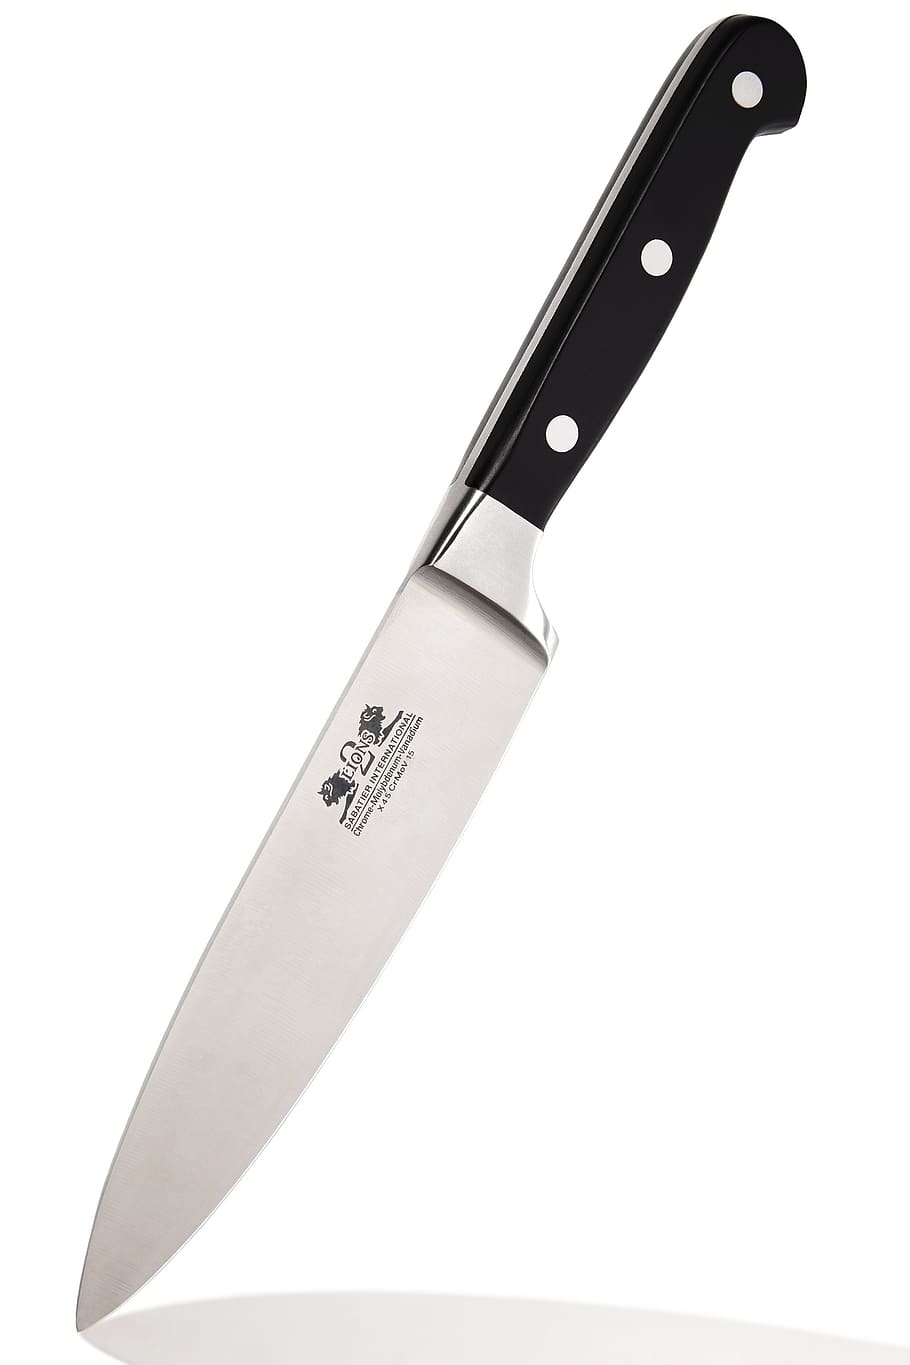 cooks knife, chefs knife, sabatier, kitchen, knives, chef, handle, chop, blade, cutting